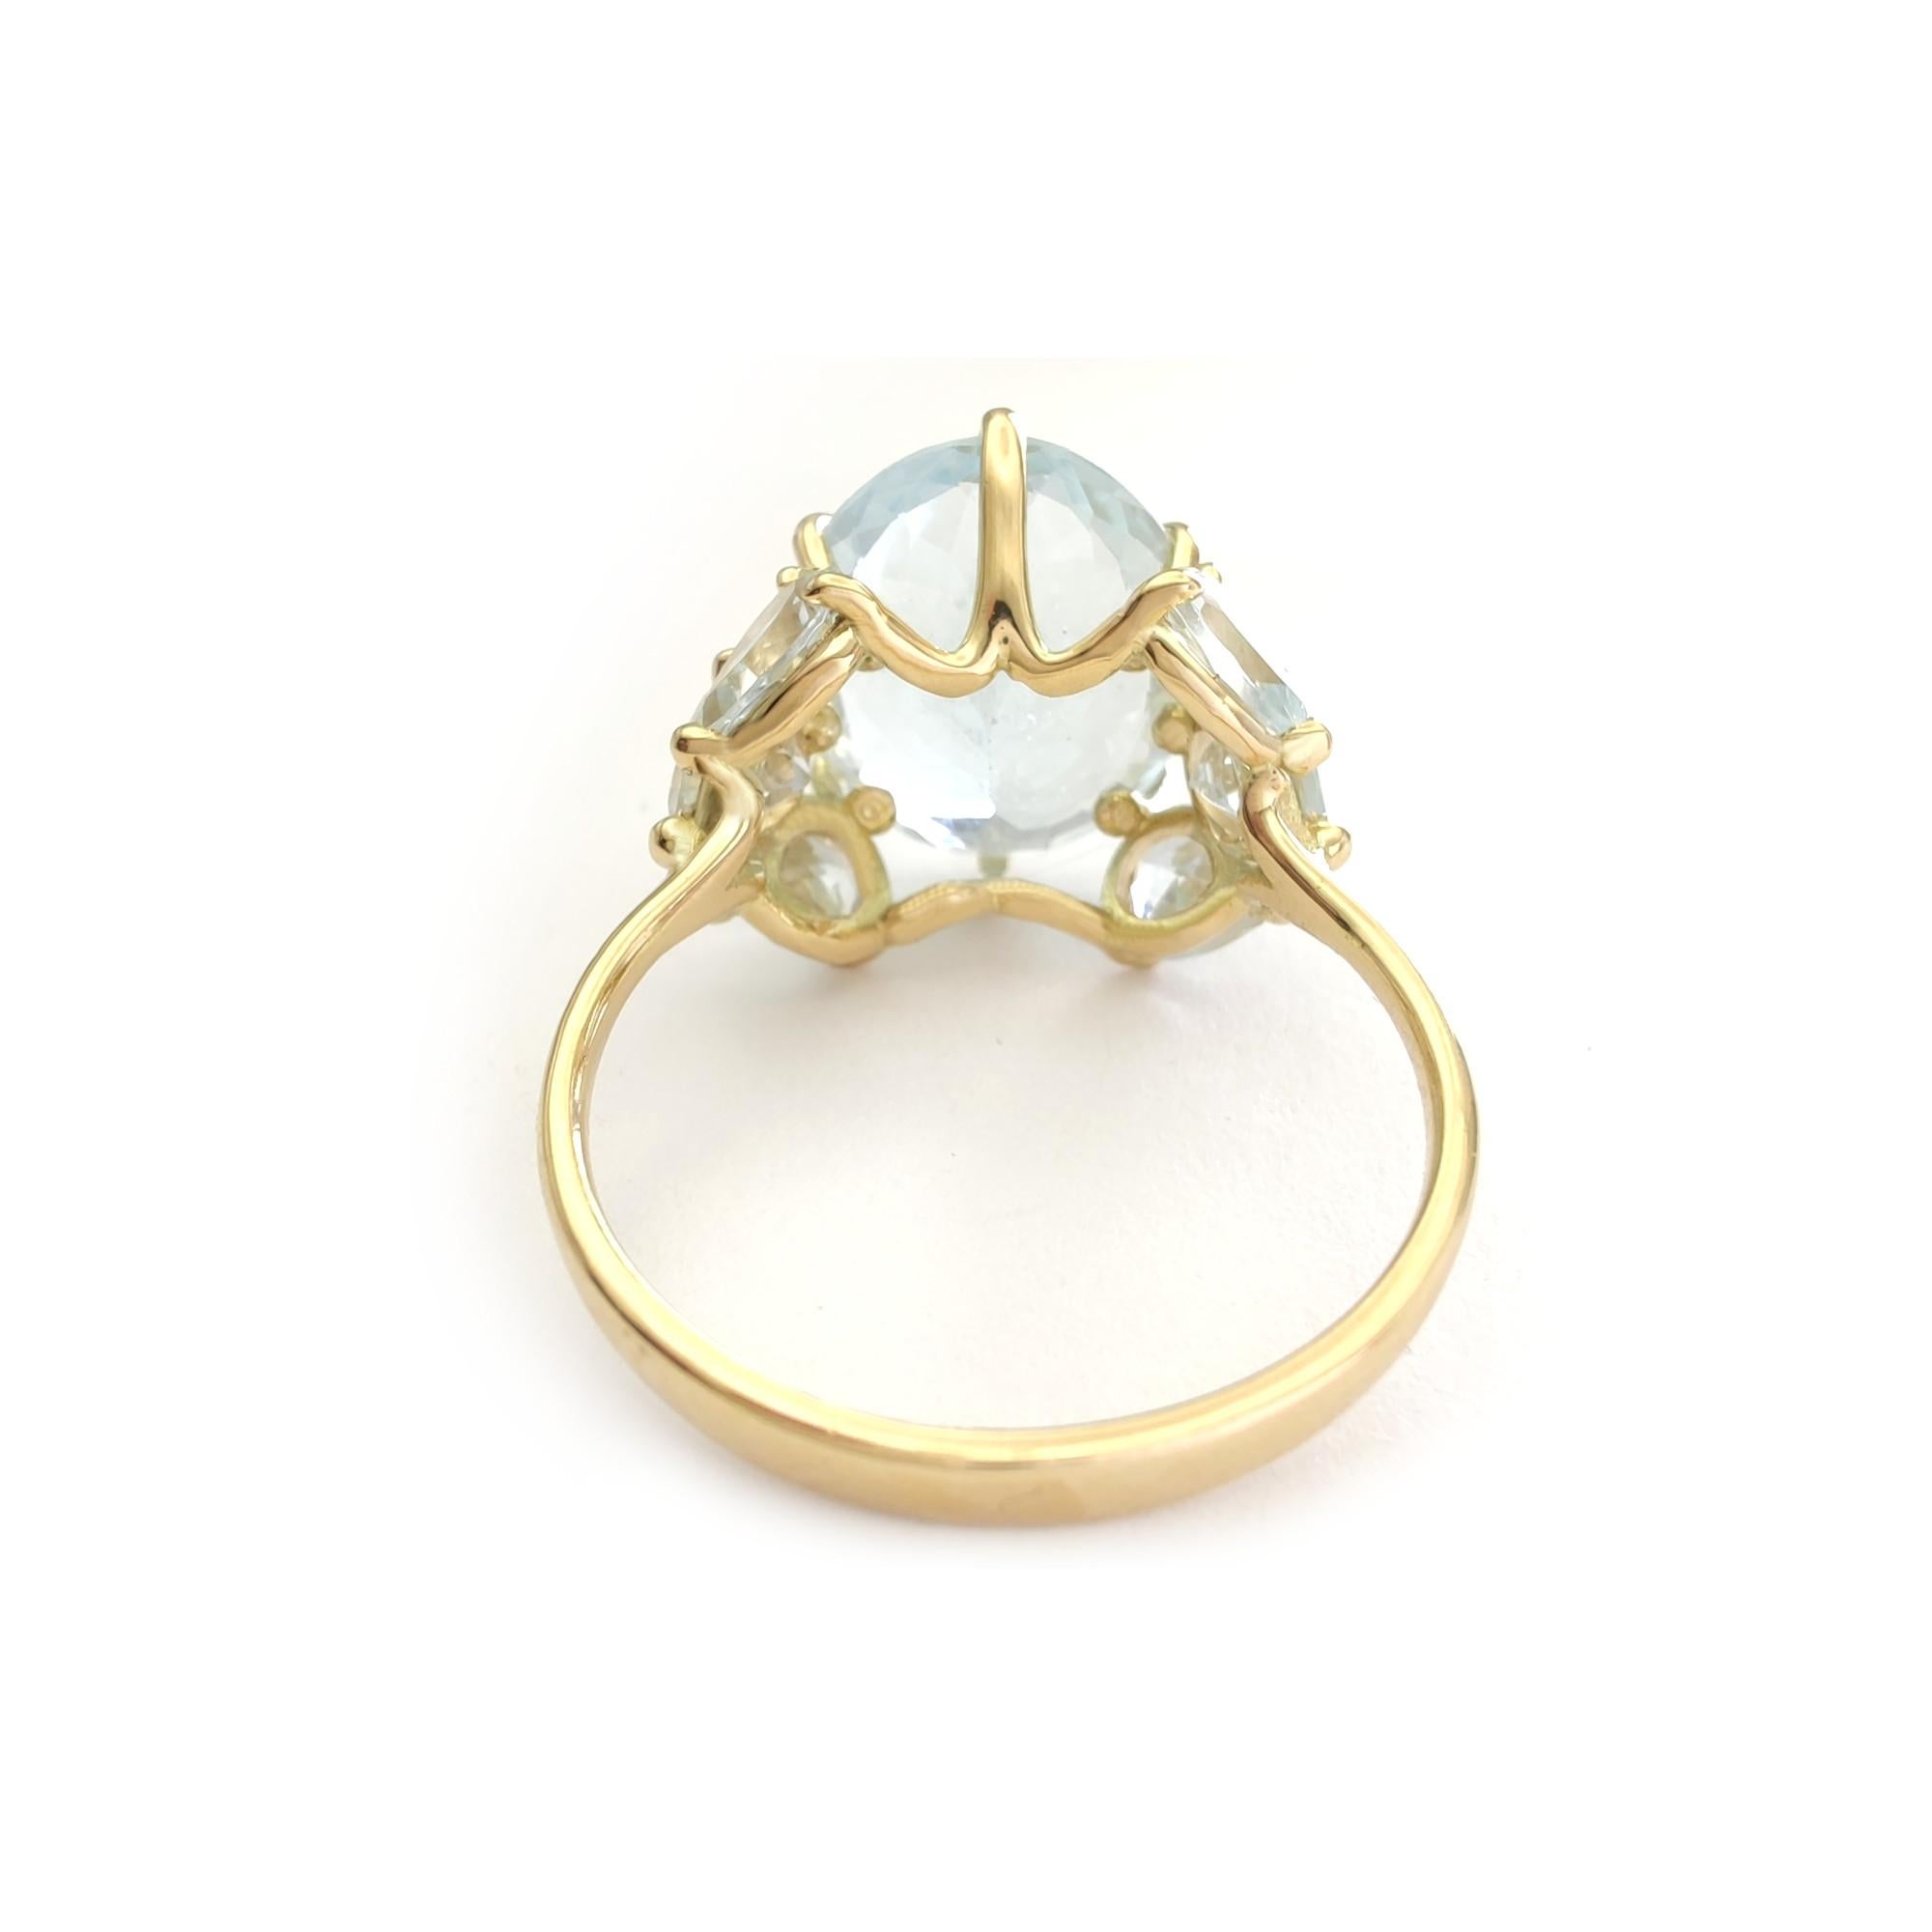 Handmade 4.8 Carat Oval Aquamarine Cocktail Ring in 18K Yellow Gold For Sale 2